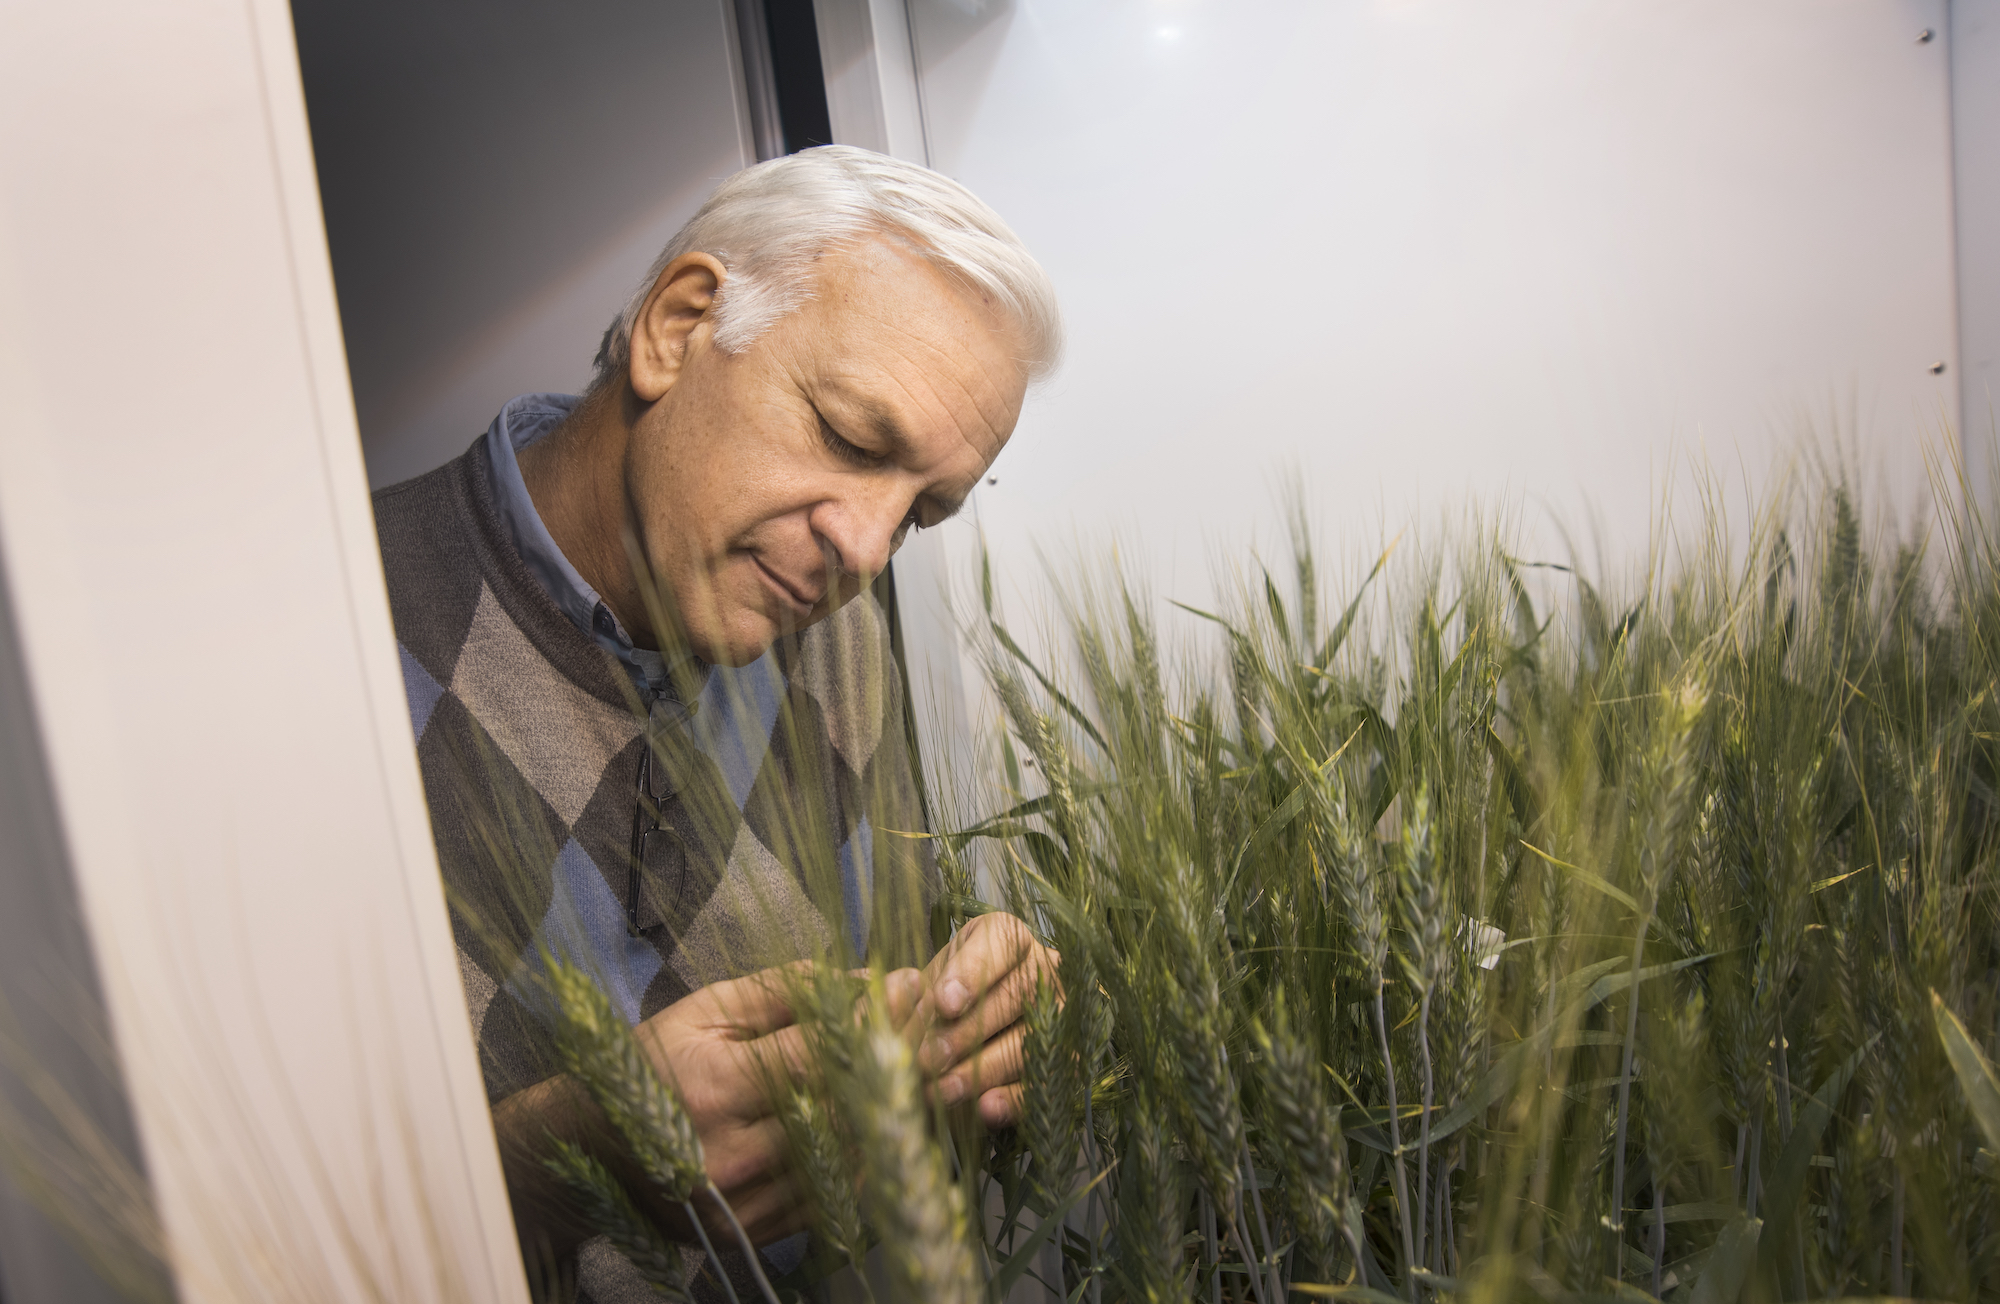 Department of Plant Sciences Distinguished Professor Jorge Dubcovsky in a UC Davis greenhouse used for wheat research. (UC Davis)